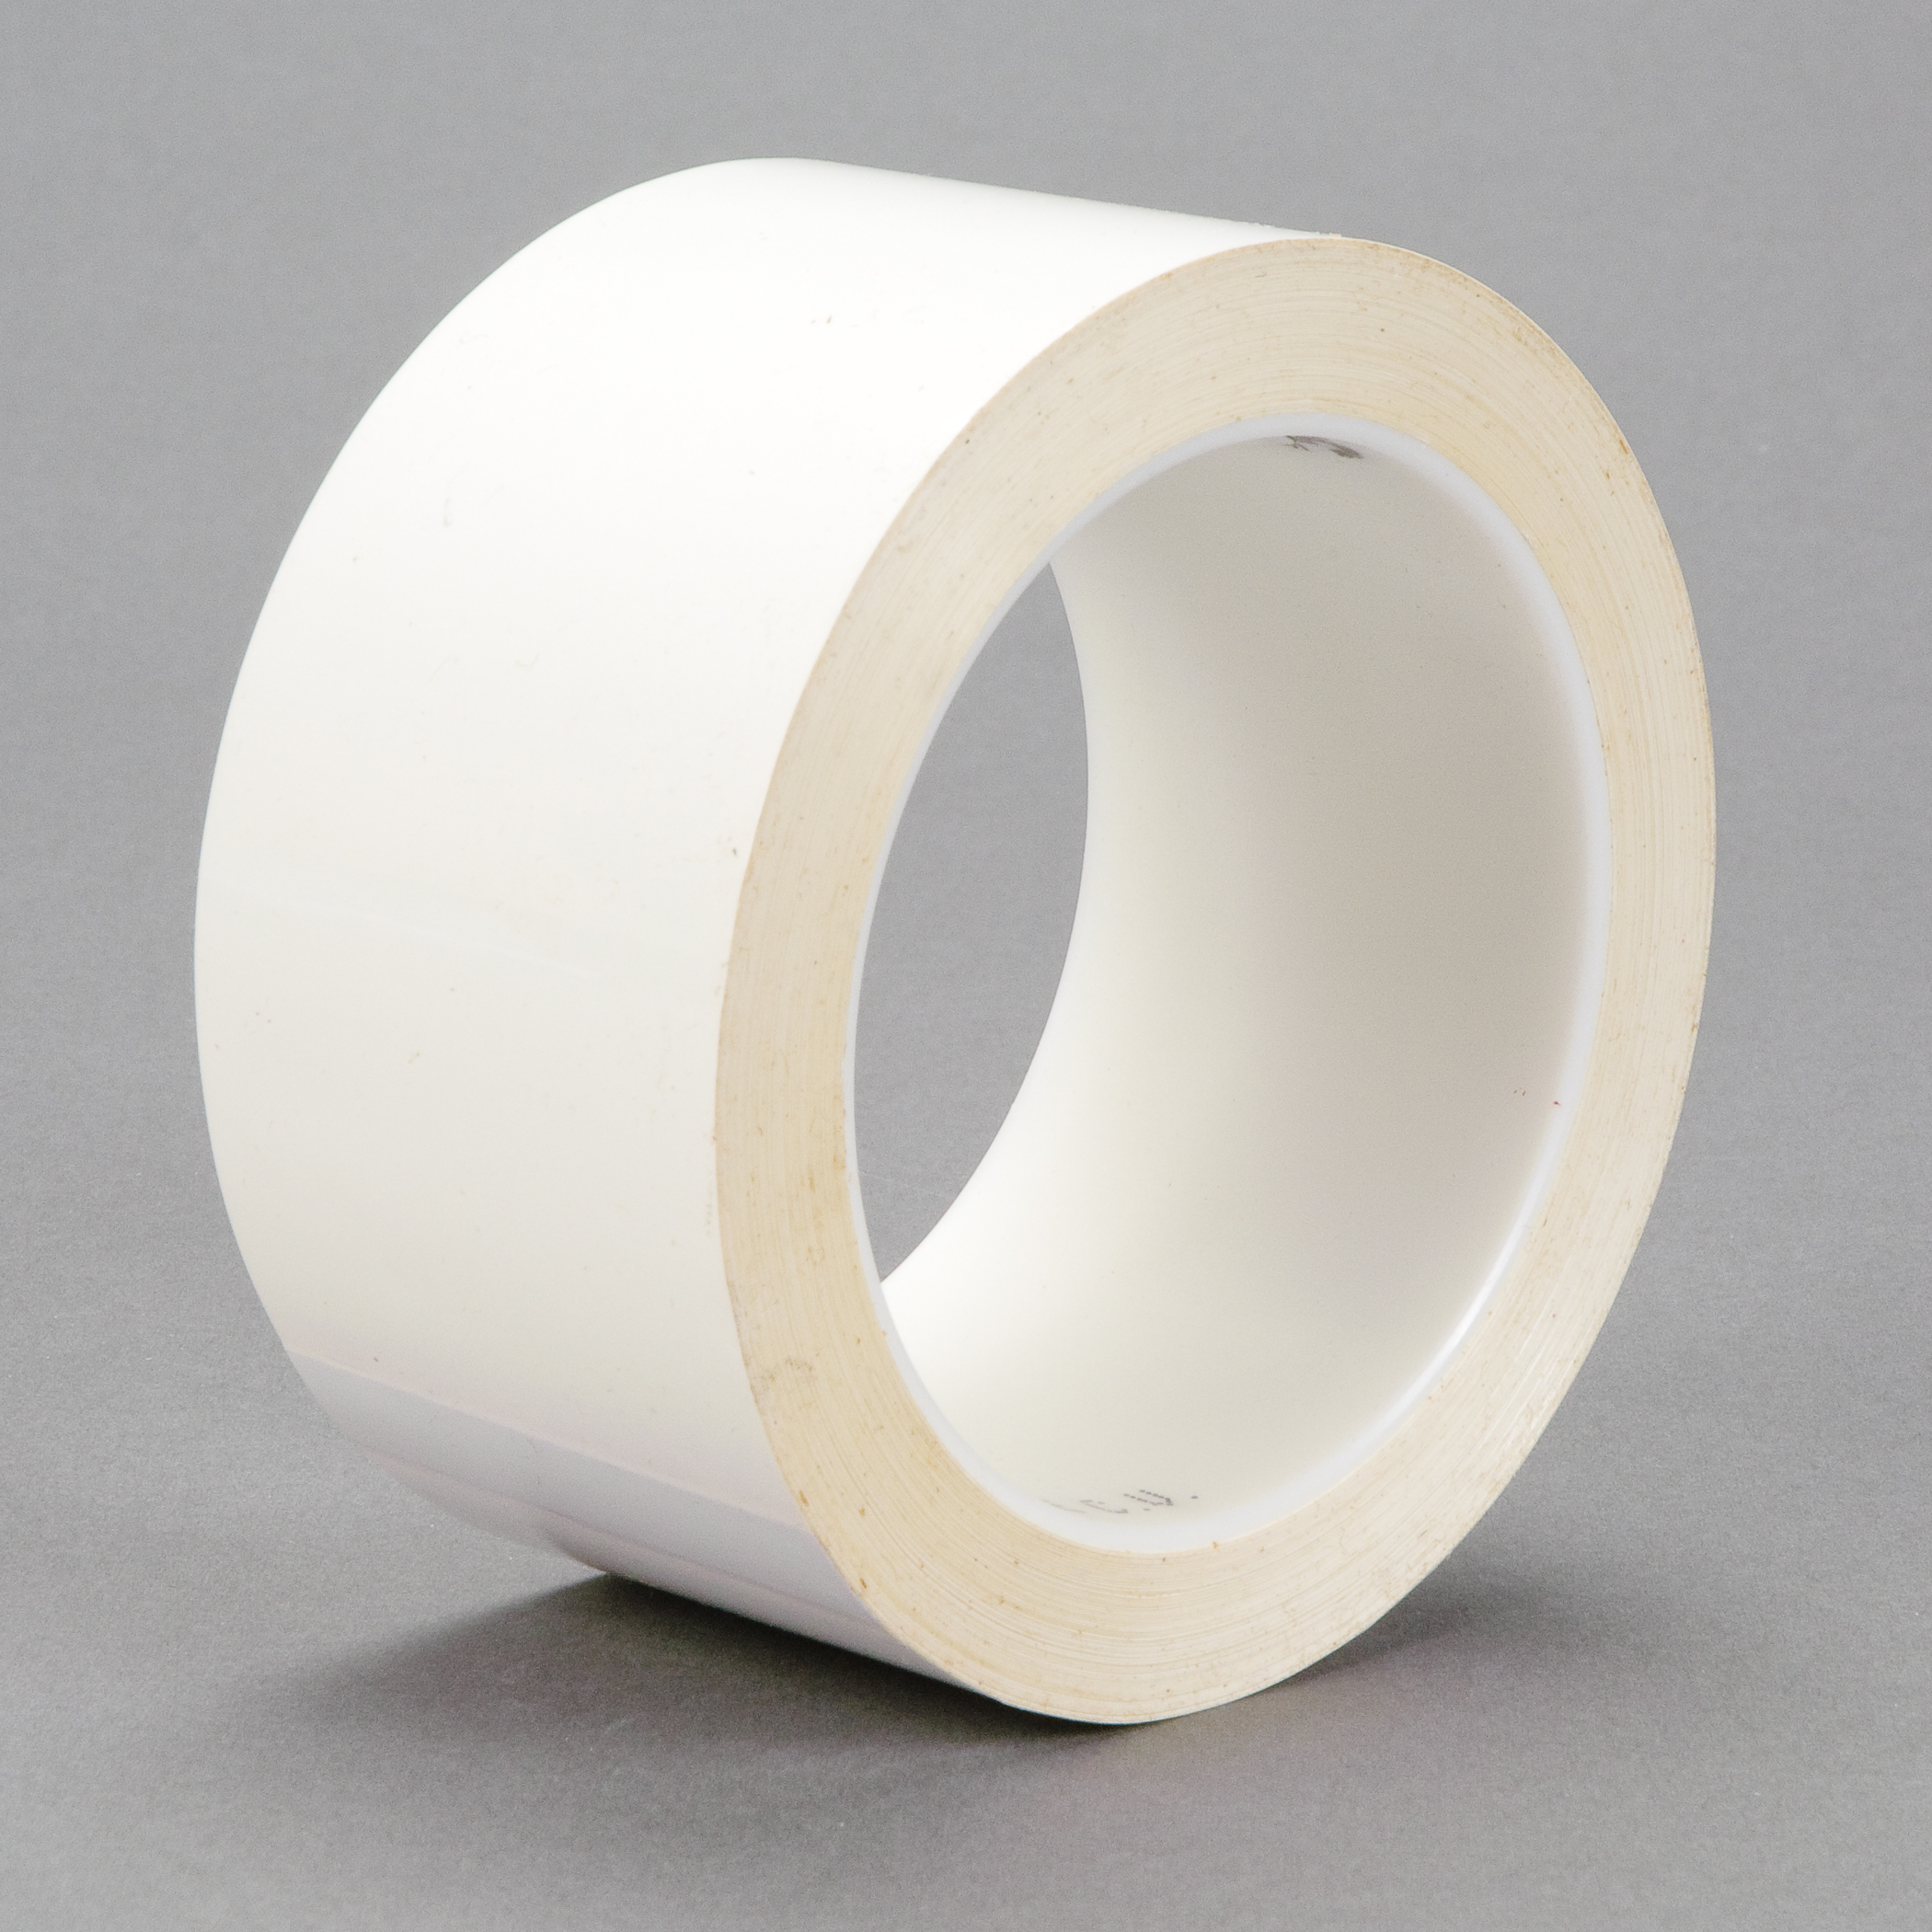 3m™ Polyester Film Tape On Converters Inc